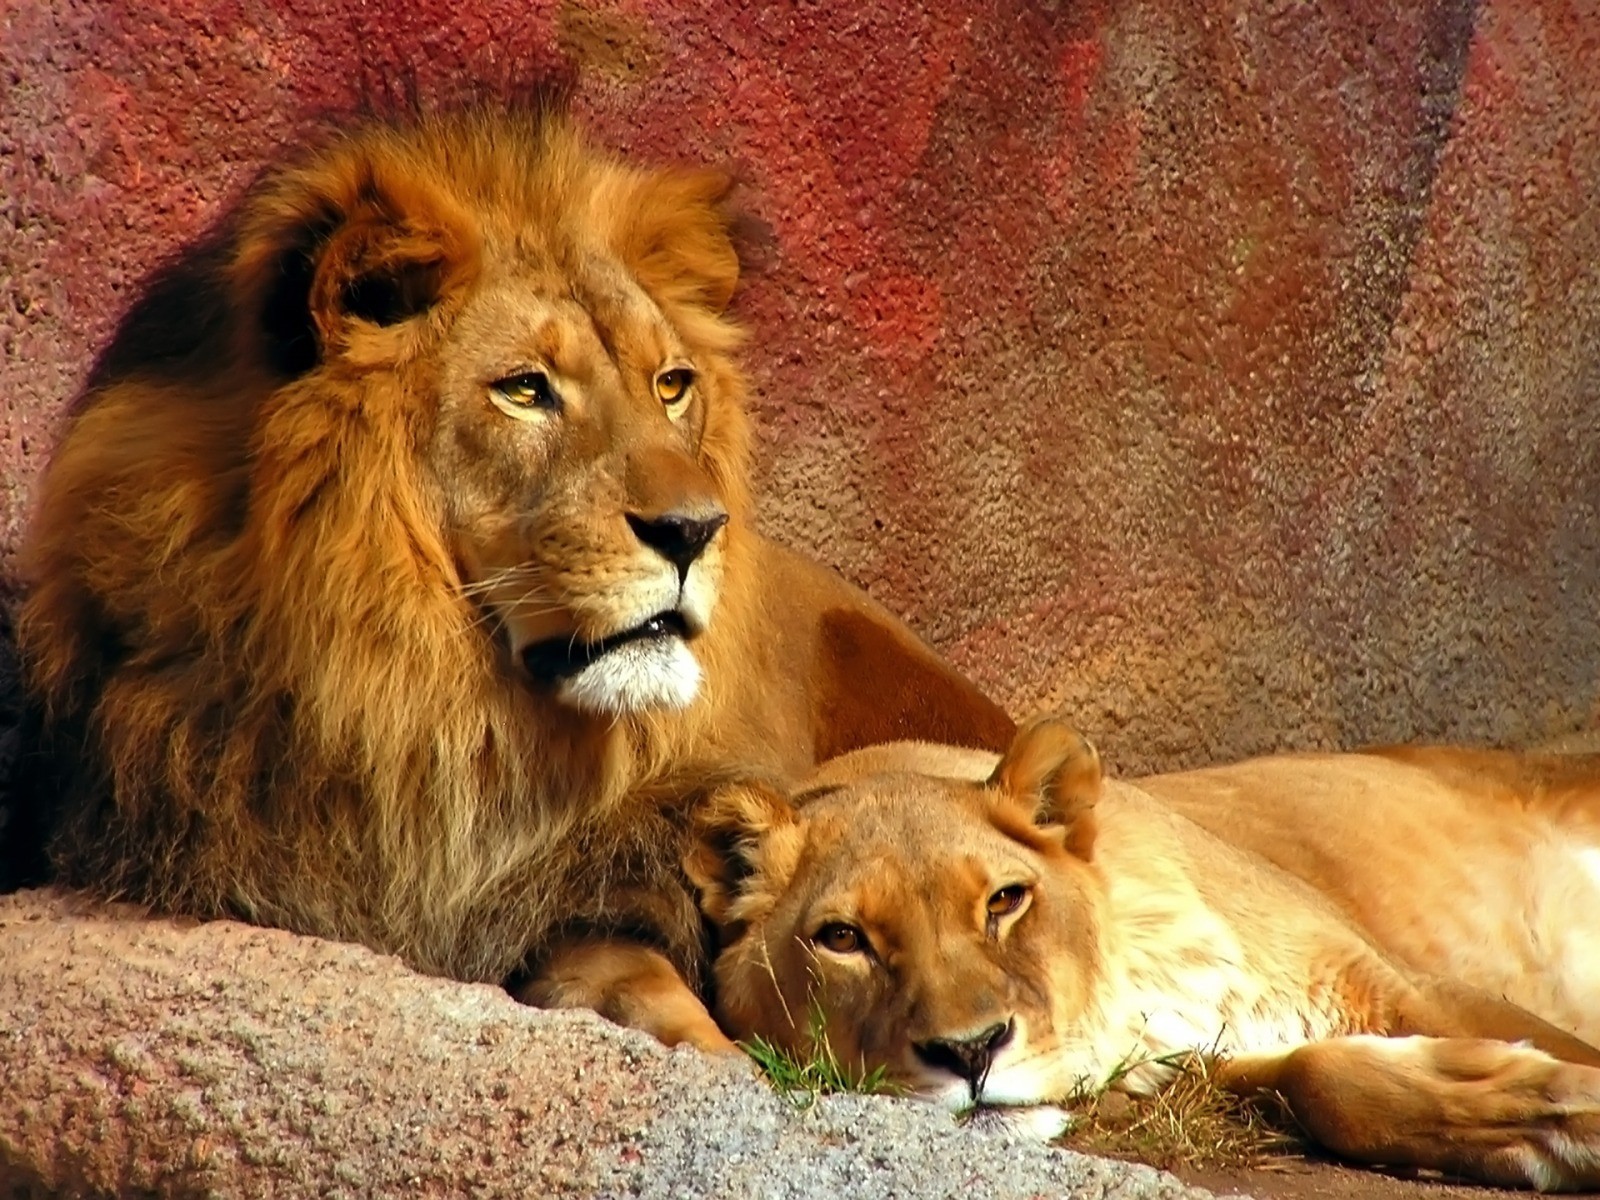 Animals___Wild_cats_For_the_lion_lioness_047289_.jpg